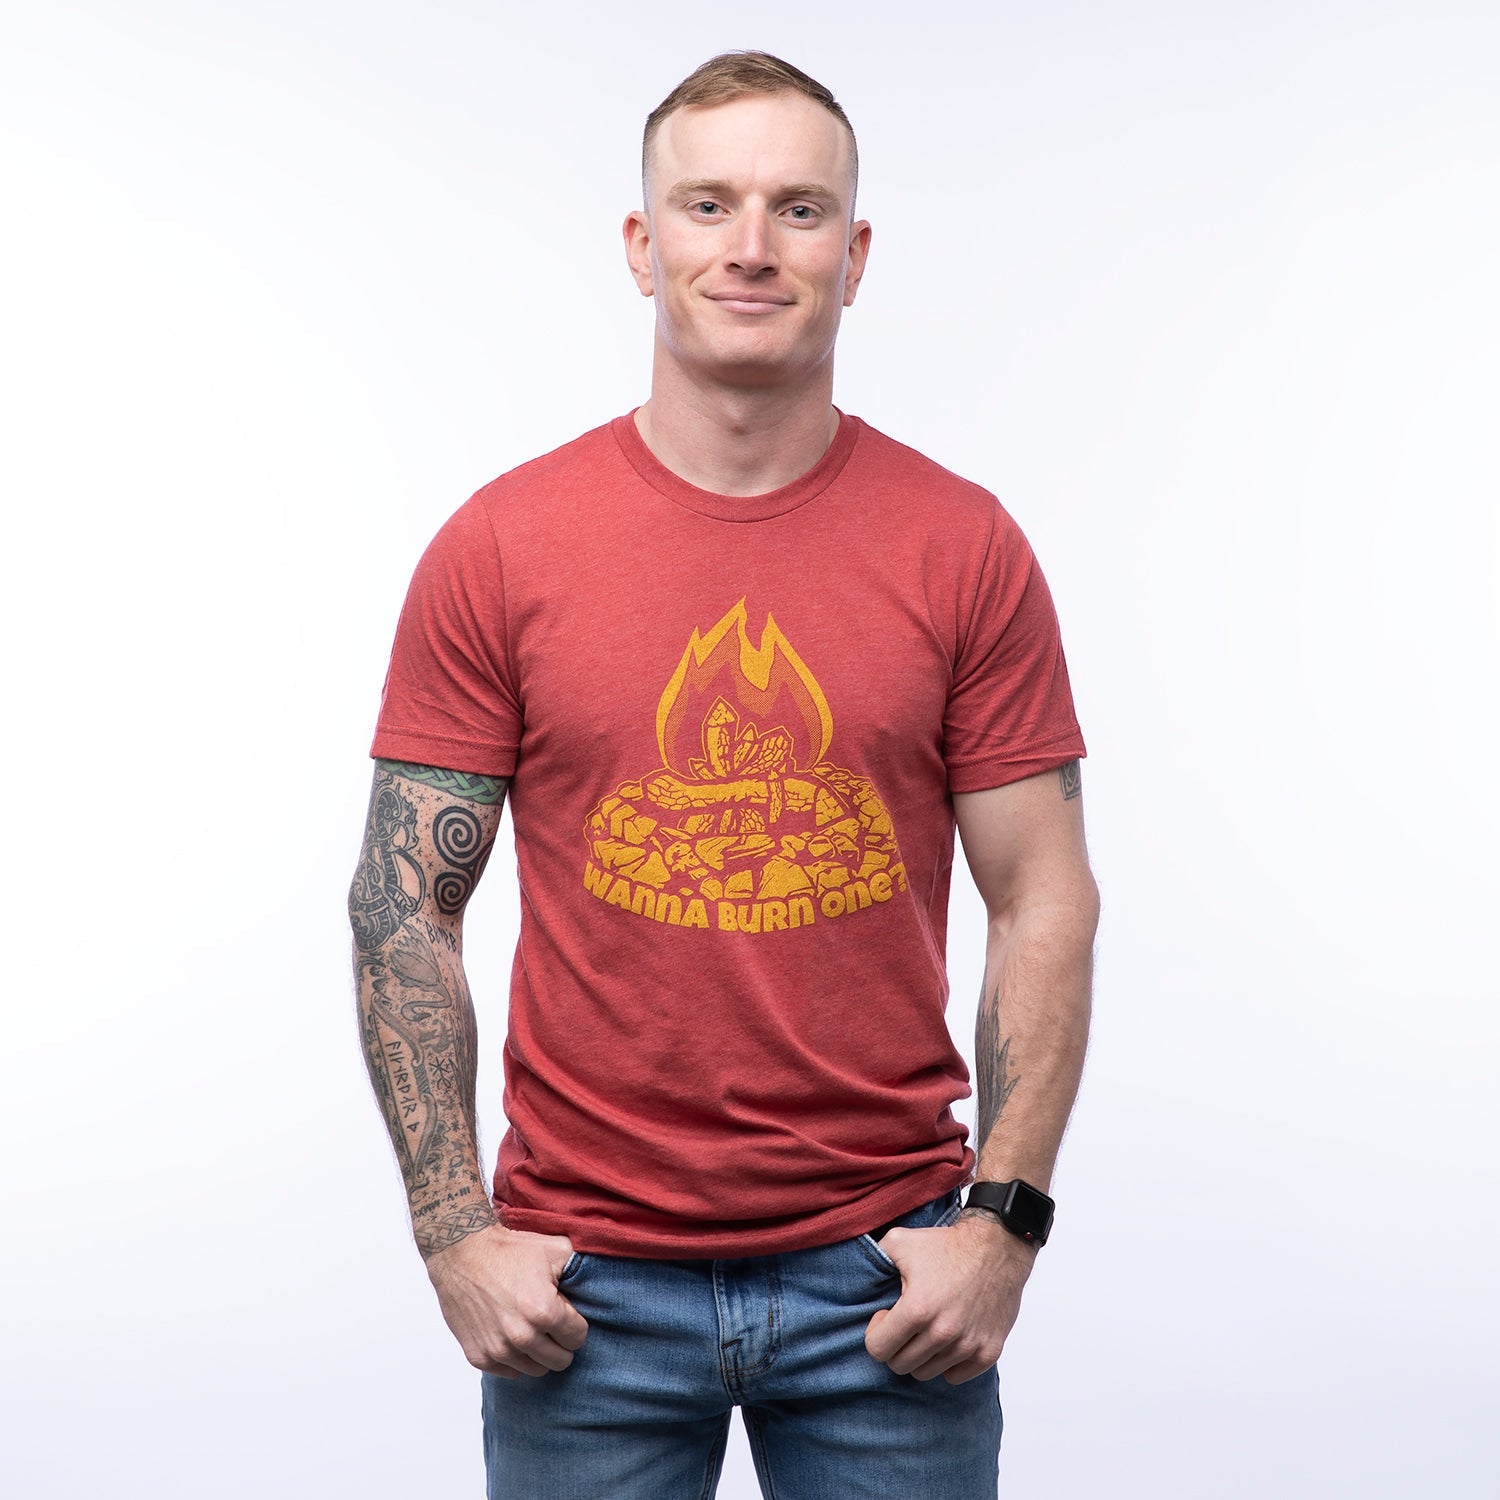 Wanna Burn One? Tee - Tee Shirts - Two Little Fruits - Two Little Fruits